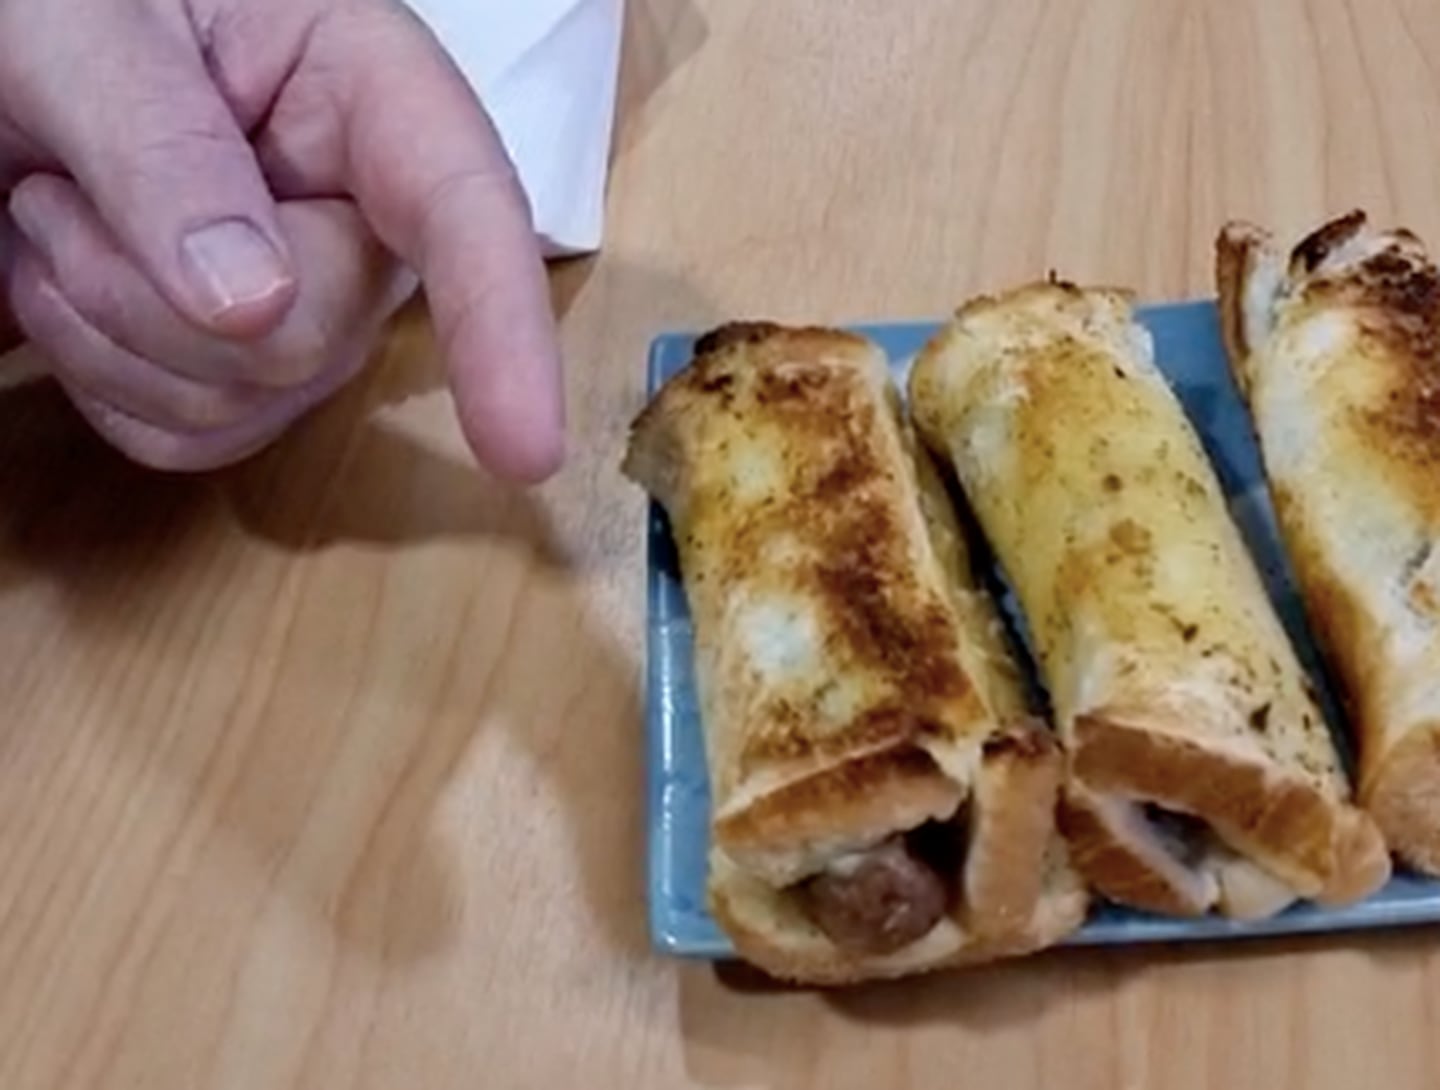 Cheese rolls with added sausage. Photo / Facebook